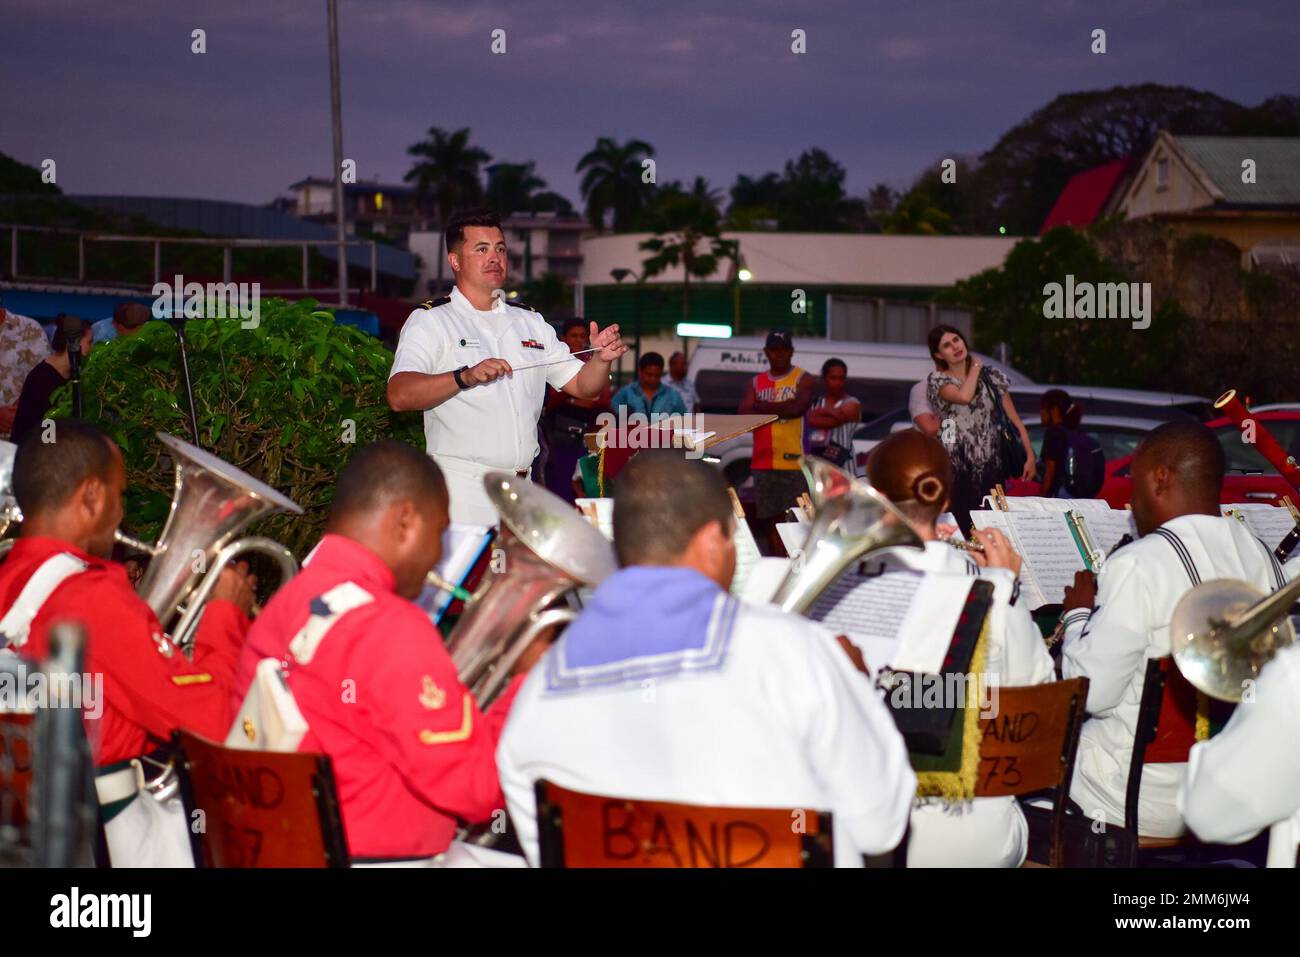 SUVA, Fiji (Sept. 15, 2022) Ens. Antonio Garcia, assistant fleet bandmaster of U.S. Pacific Band (PACFLT), conducts a combined performance of PACFLT and the Republic of Fiji Military Forces Band during a concert in Suva, Fiji. The visit to Fiji emphasized the U.S. commitment to strengthening partnerships for an enduring free and open Indo-Pacific. Stock Photo